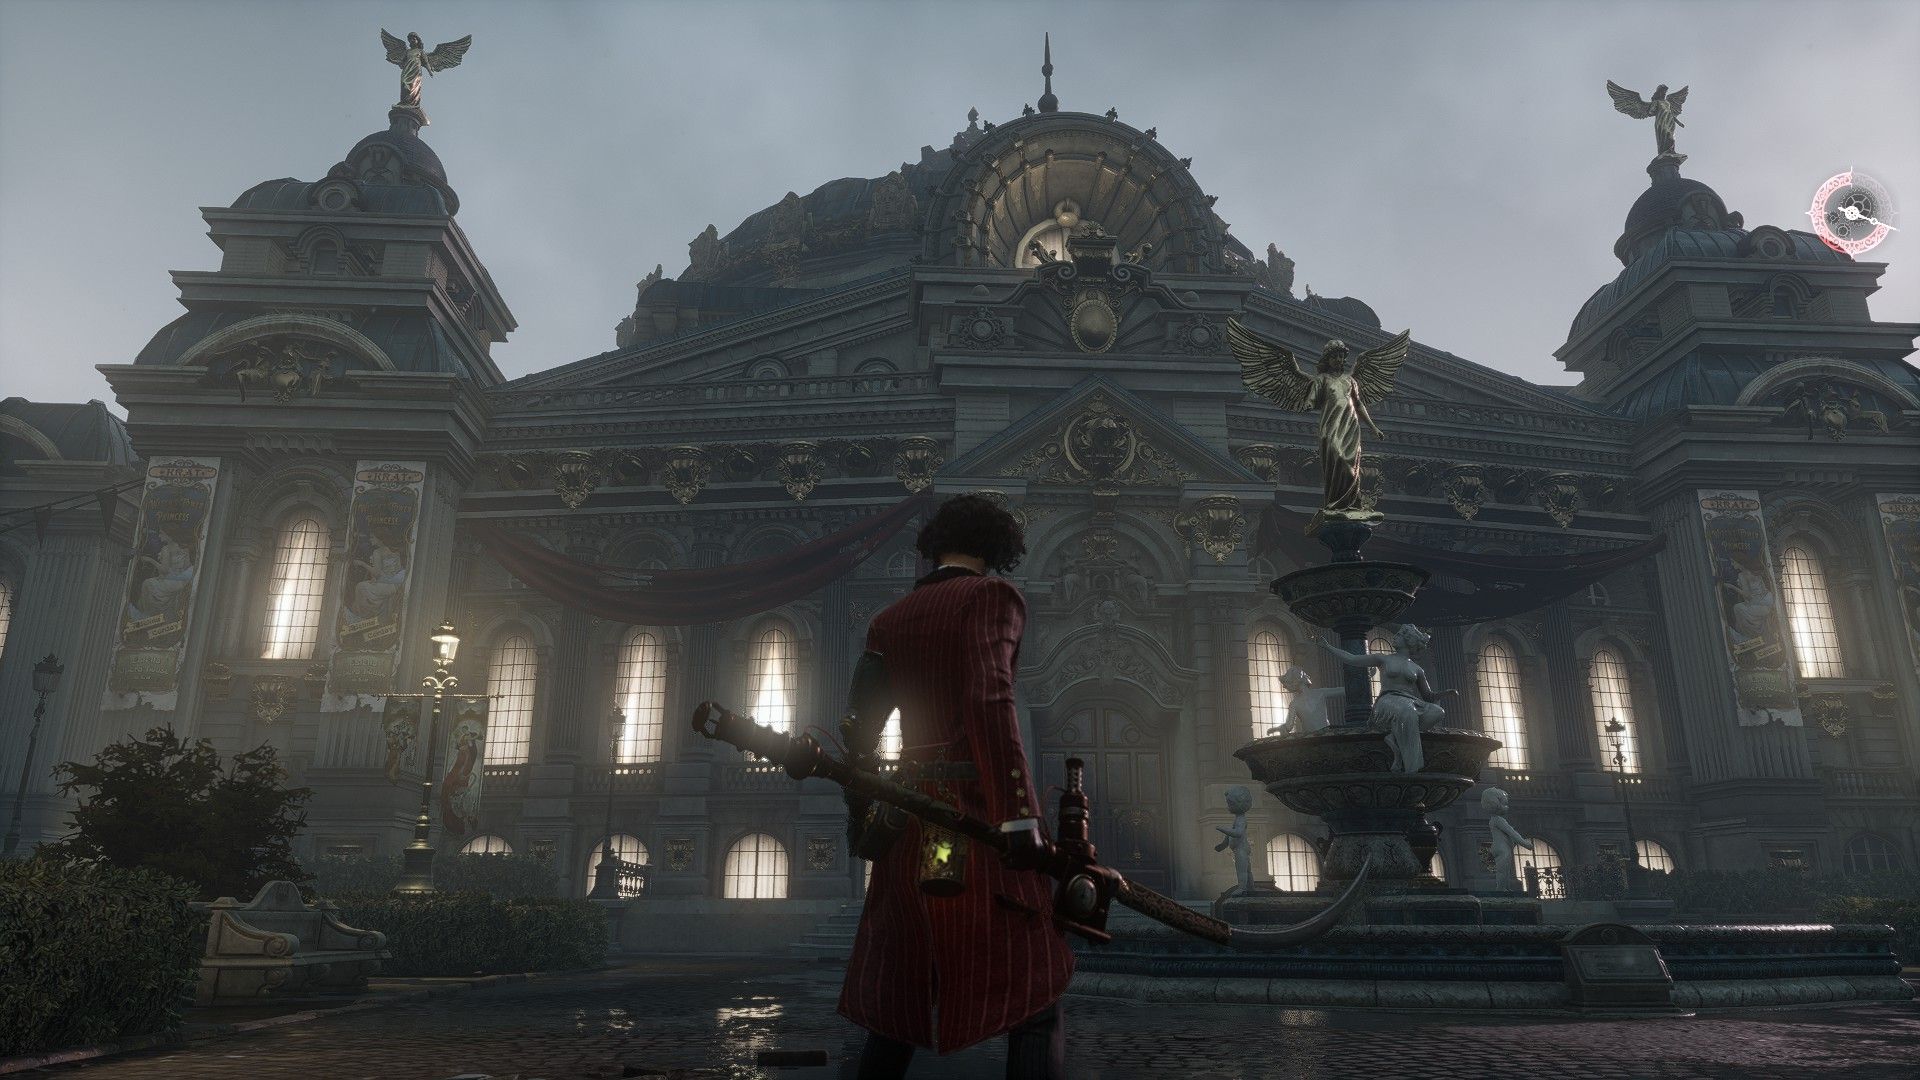 P Stands In Front Of The Estella opera House in Lies of P